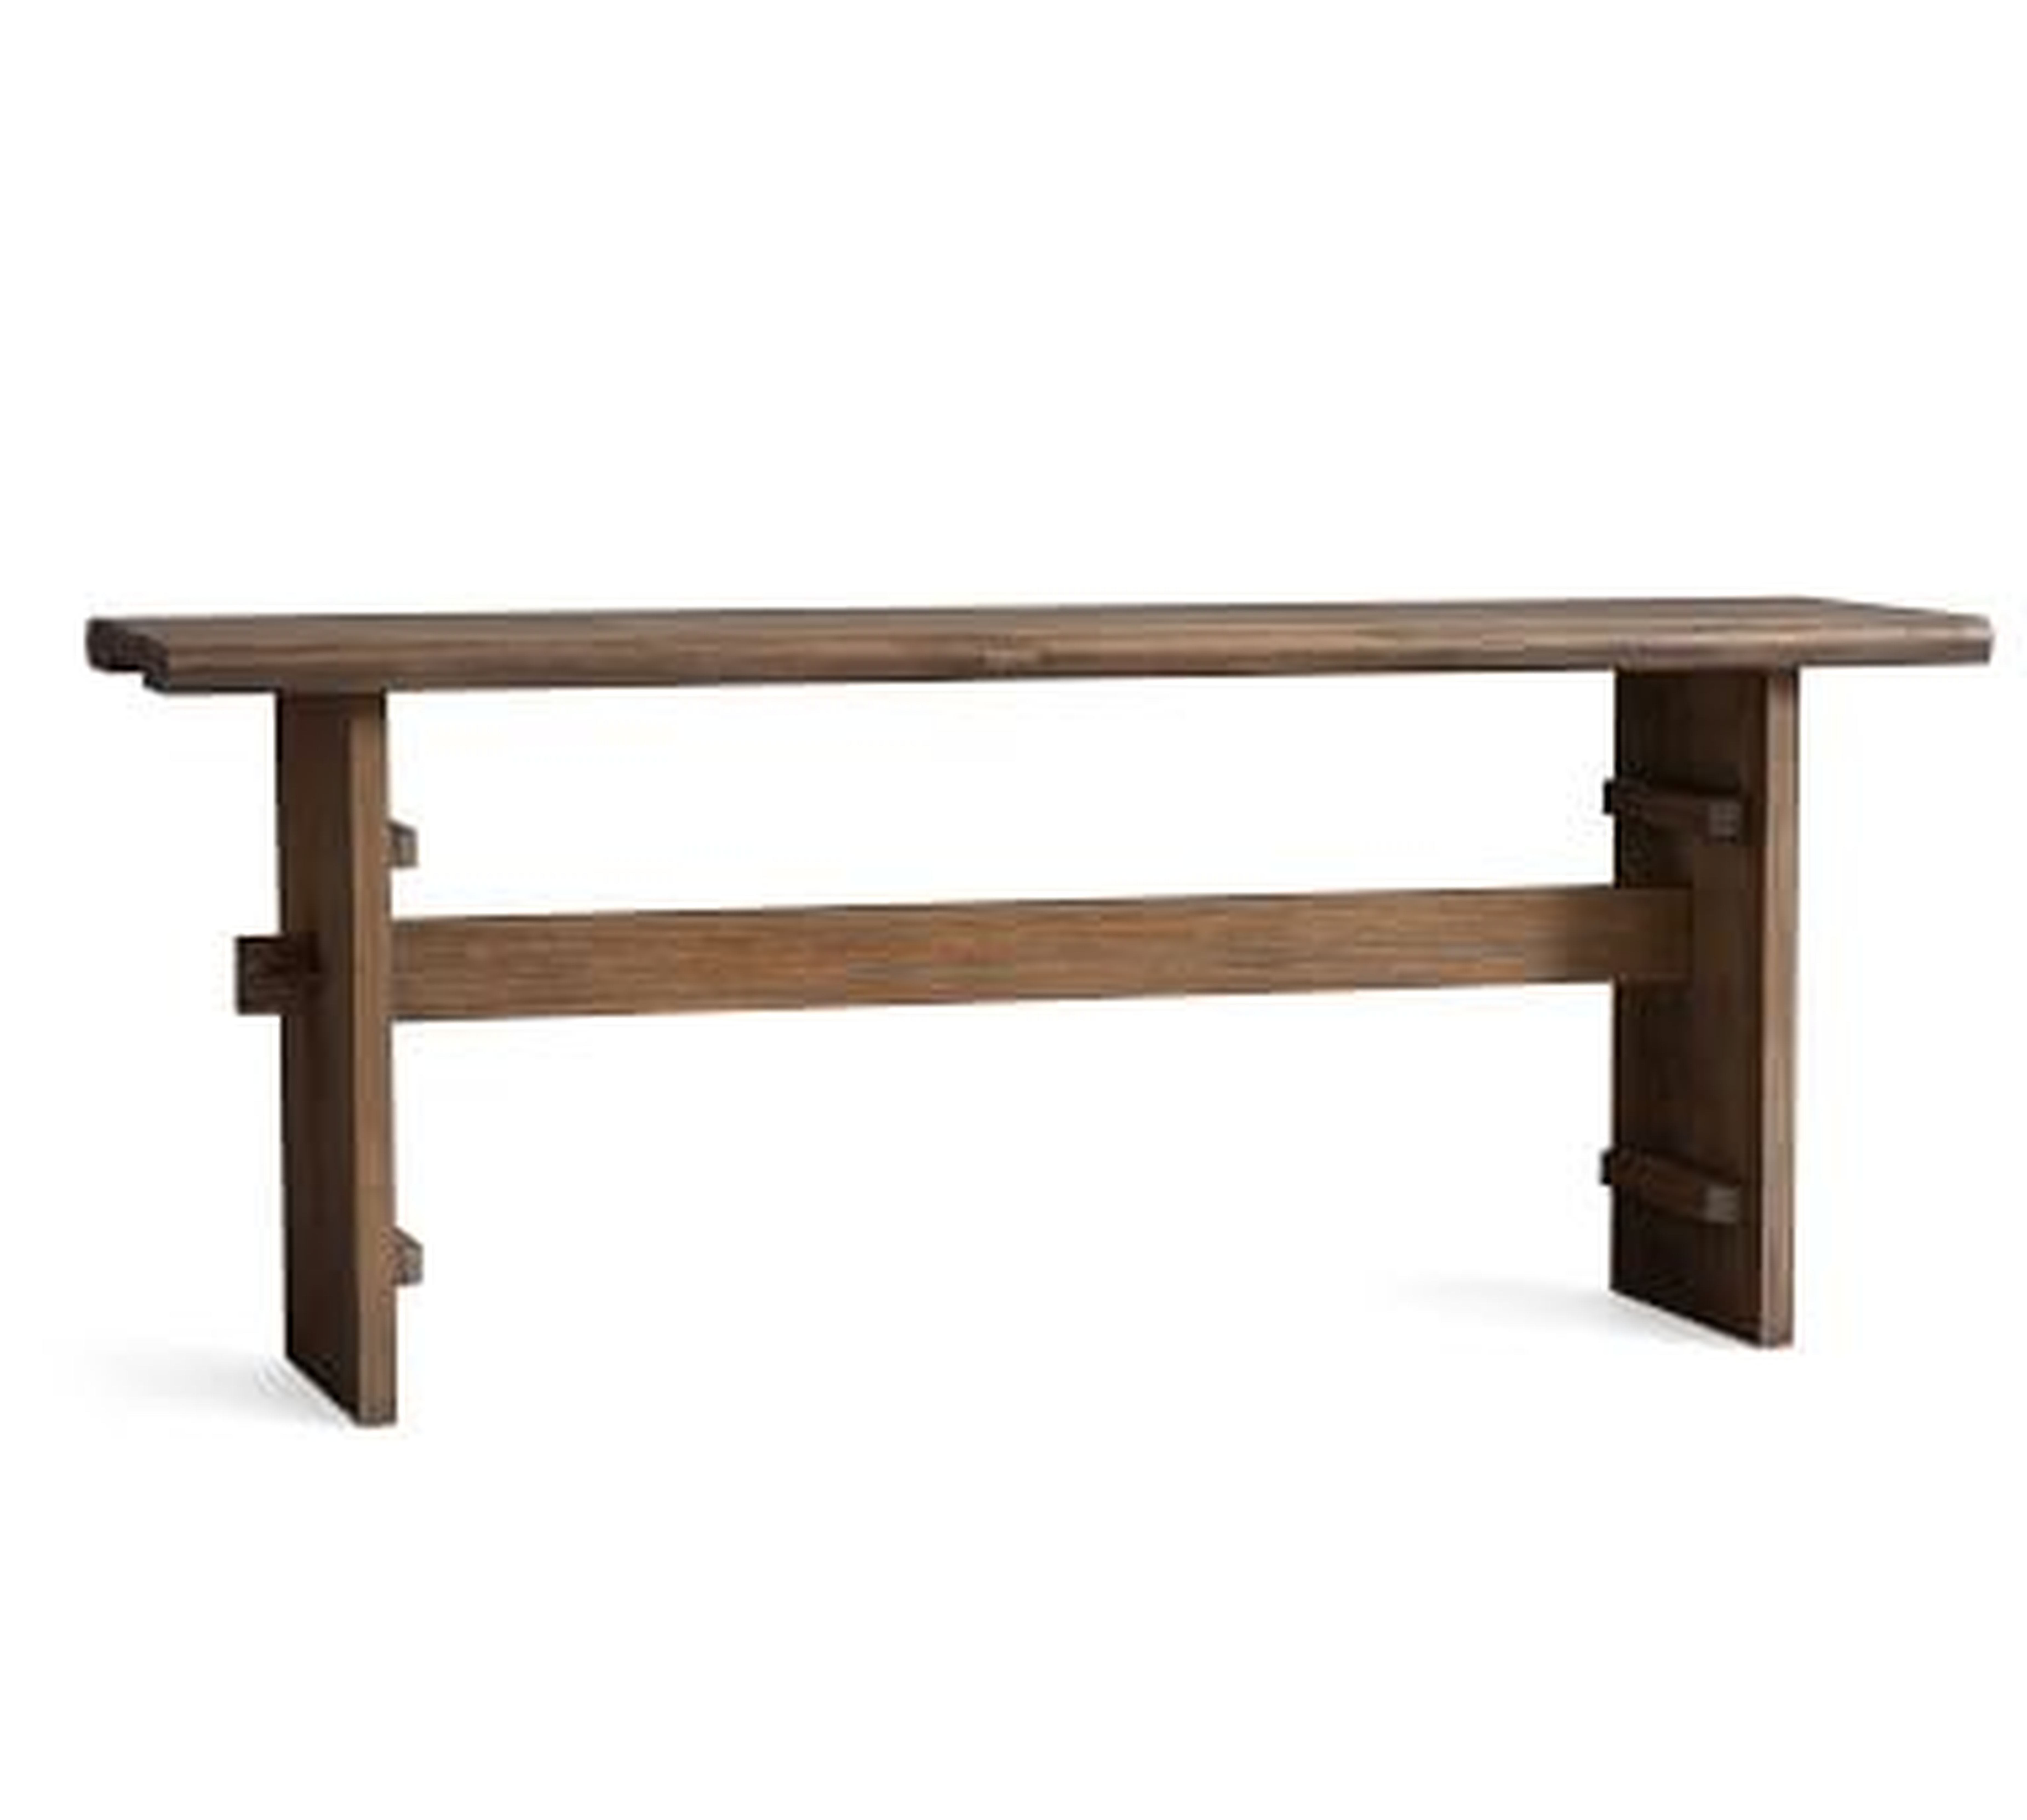 Easton 74" Reclaimed Wood Console Table, Weathered Elm - Pottery Barn